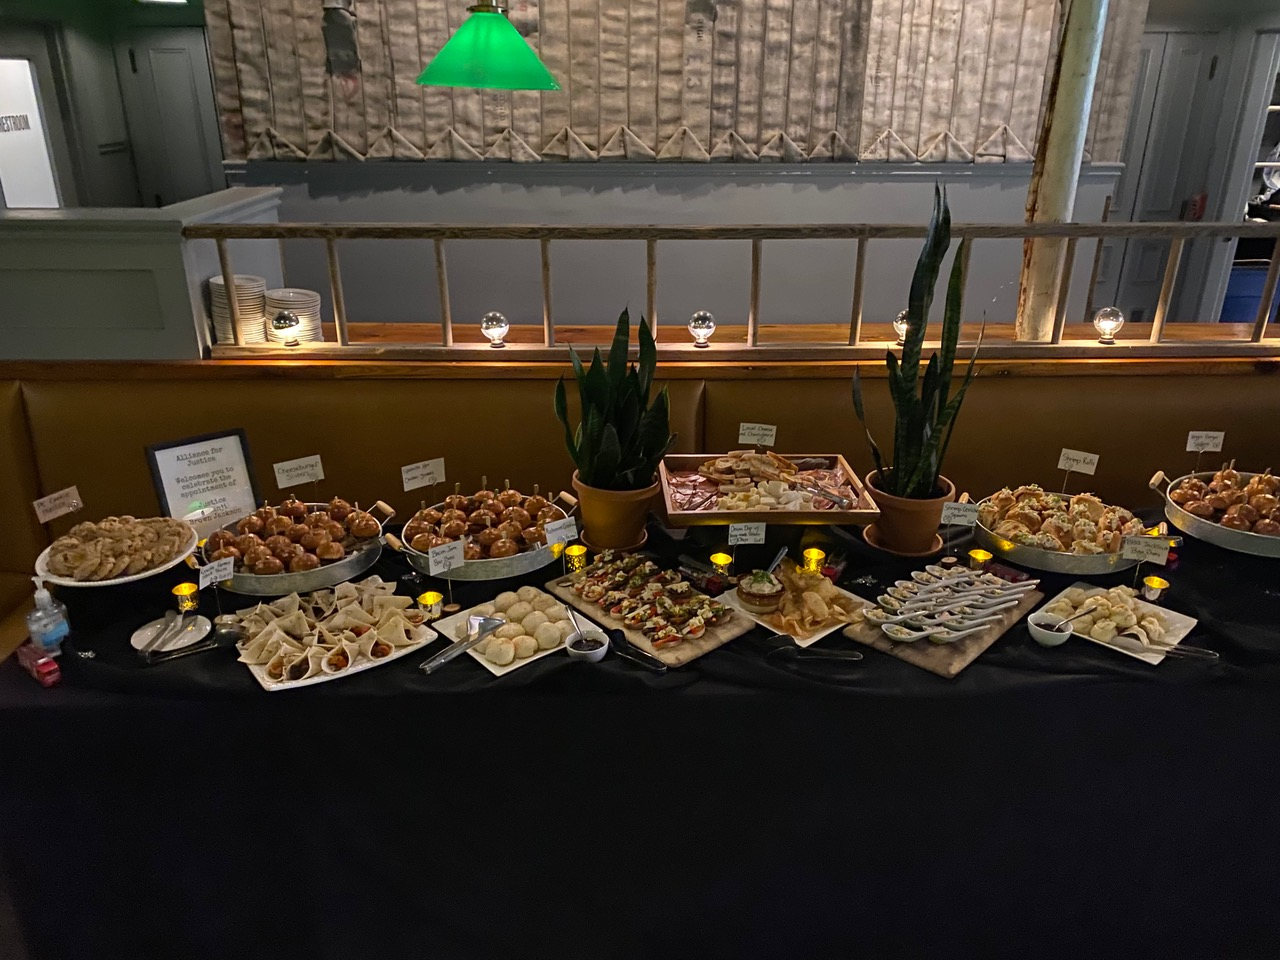 Catering platters